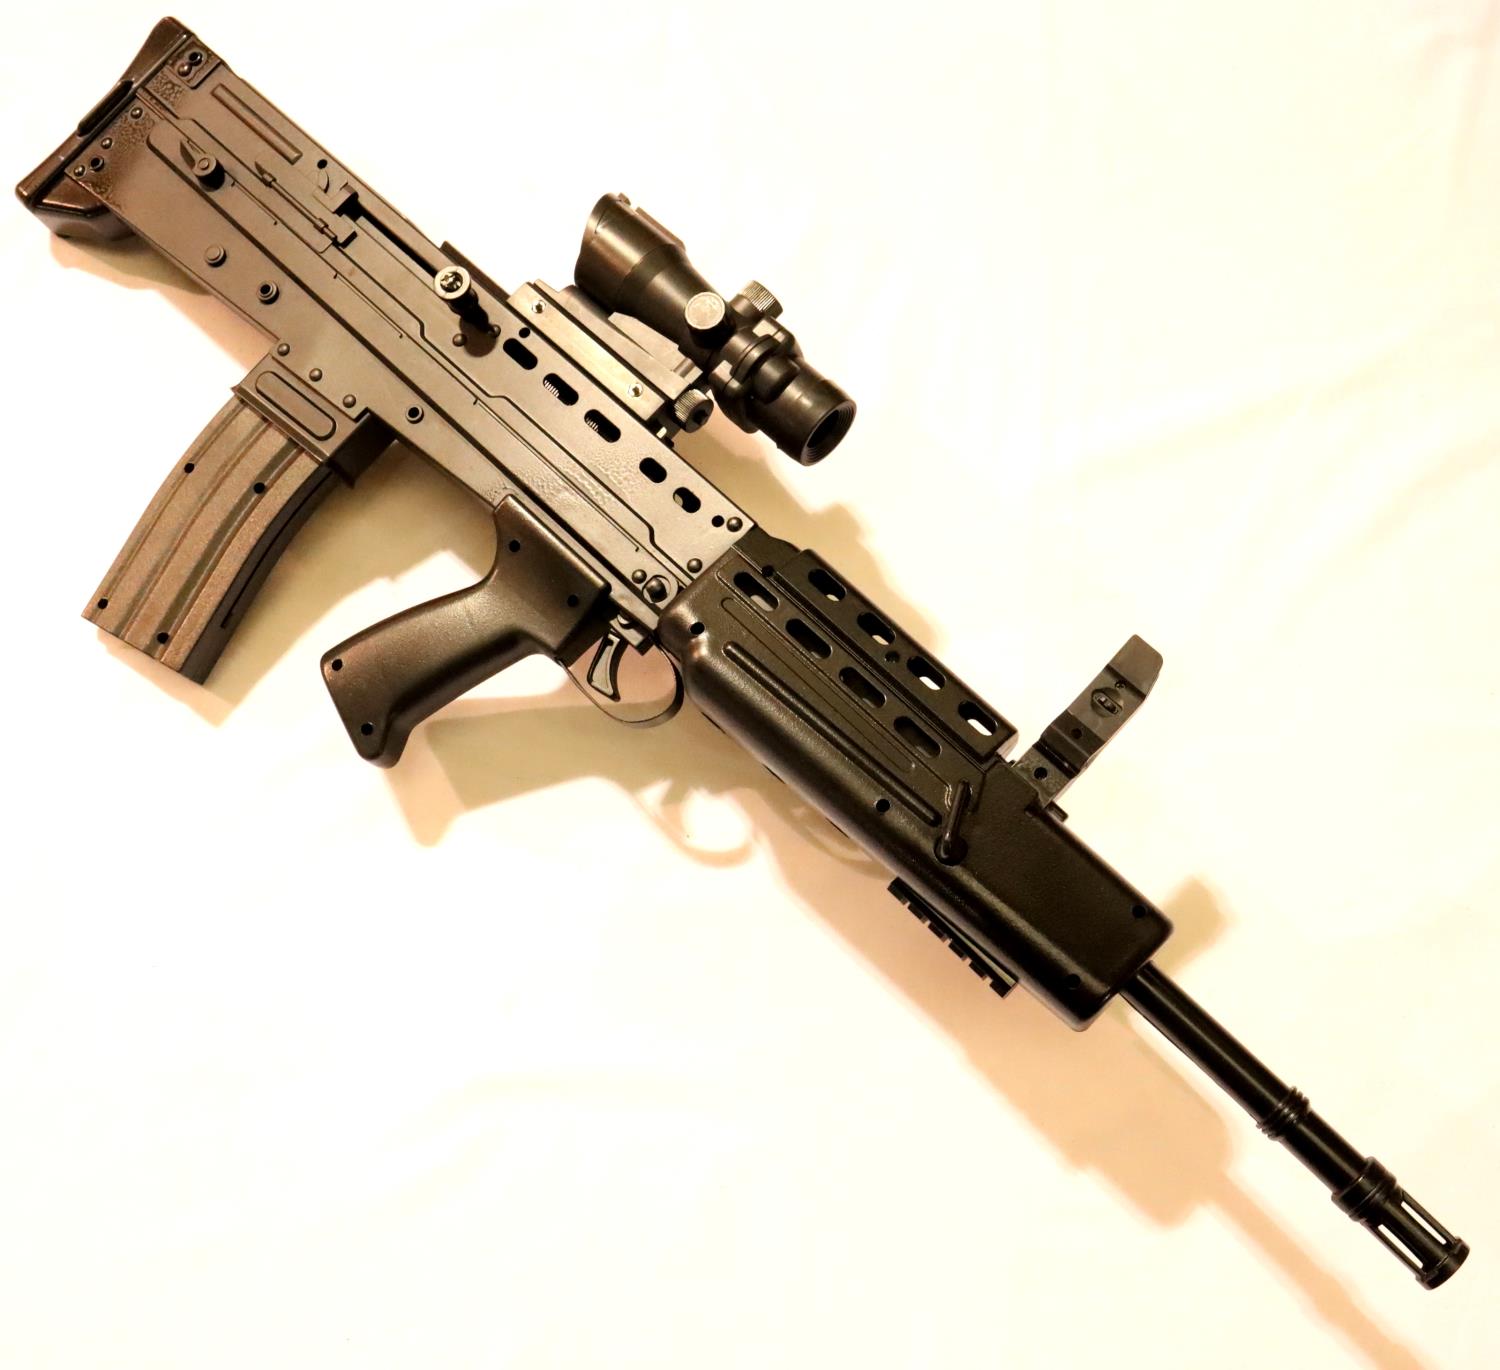 Replica SA-80 assault rifle. P&P Group 3 (£25+VAT for the first lot and £5+VAT for subsequent lots) - Image 2 of 2